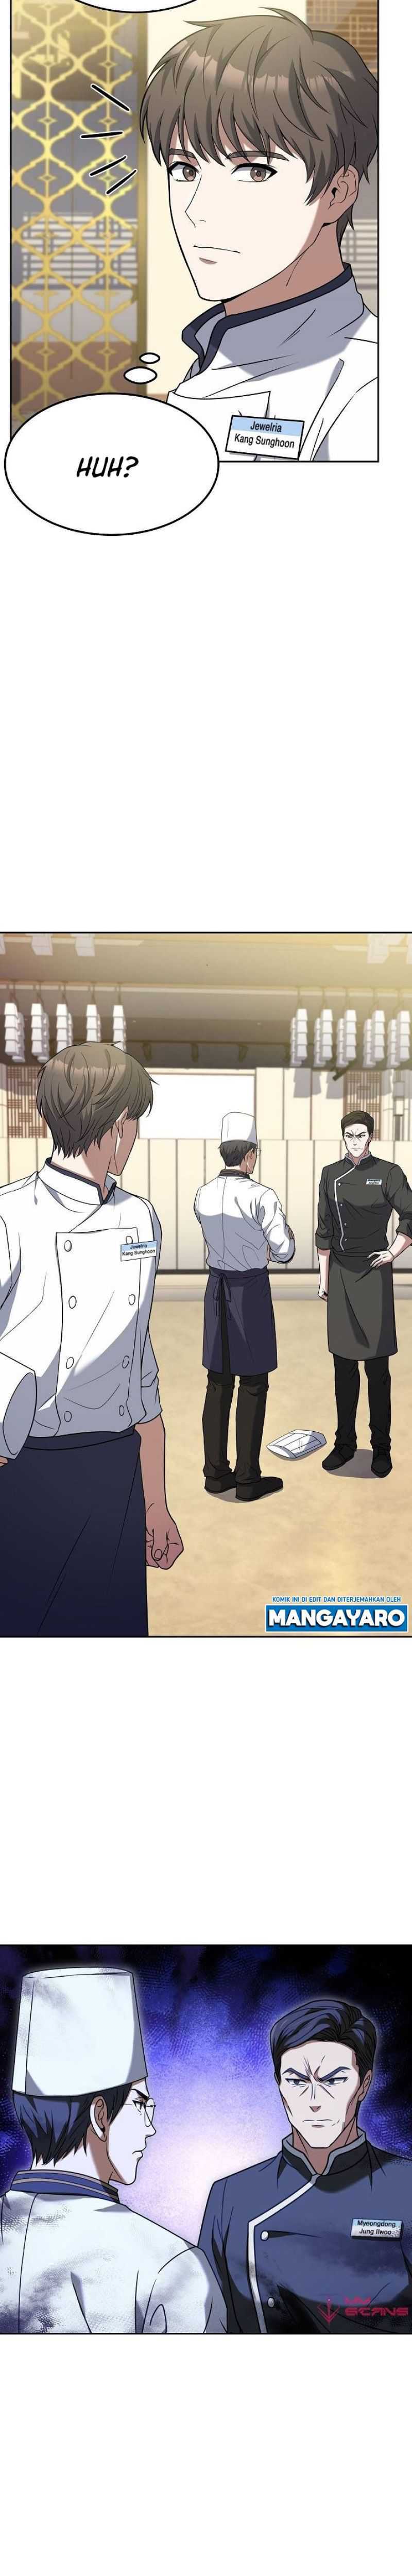 Youngest Chef From the 3rd Rate Hotel Chapter 51